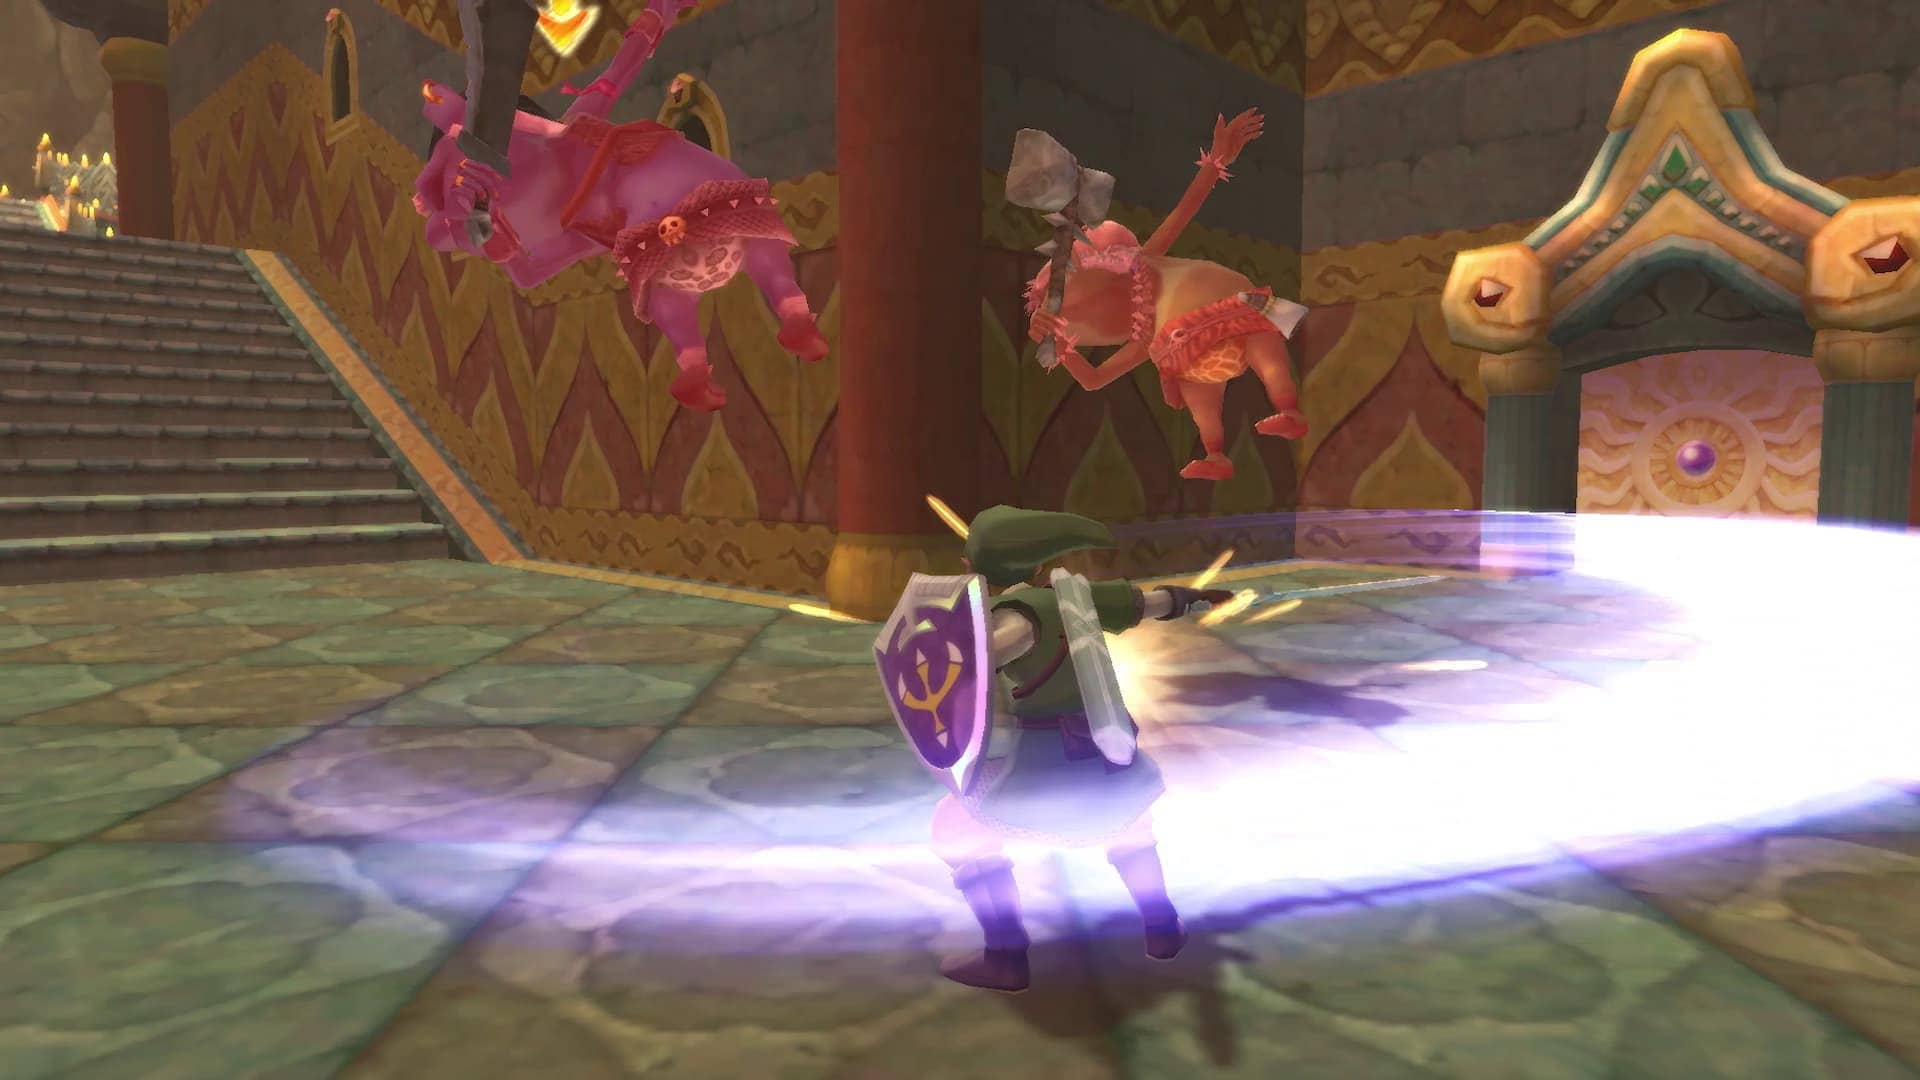 Gameplay footage showing Link performing various attacks and moves.